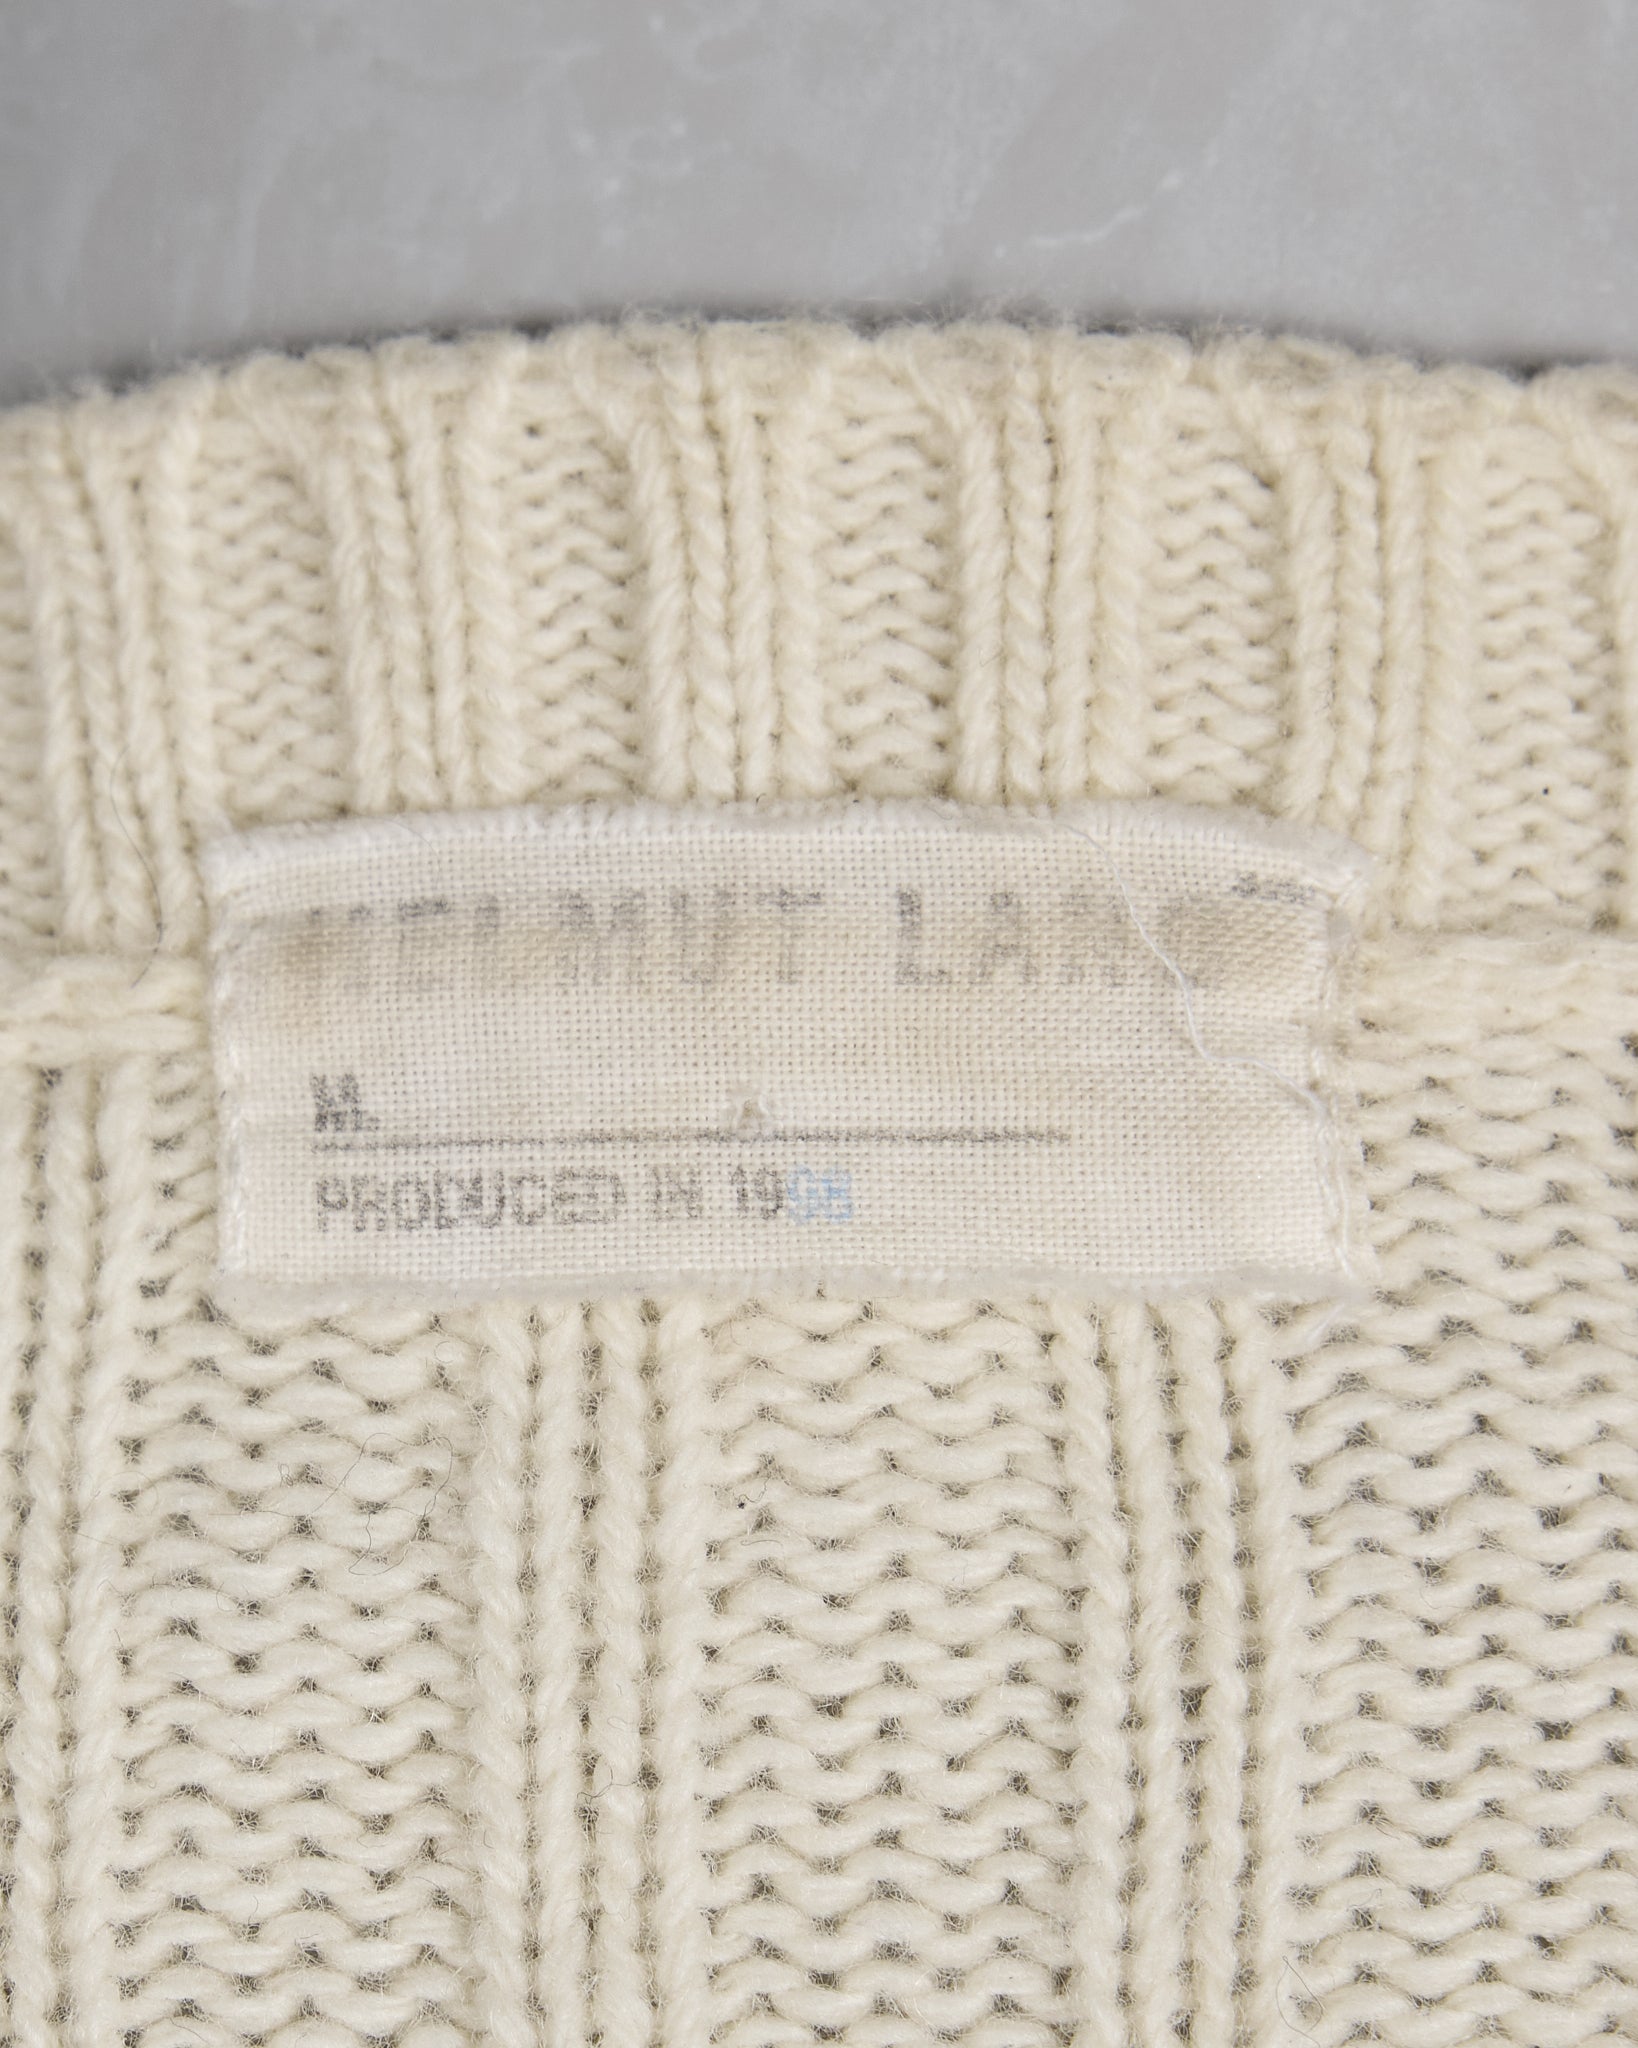 Helmut Lang Cream Ribbed Wool Knit Sweater - AW98 tag photo